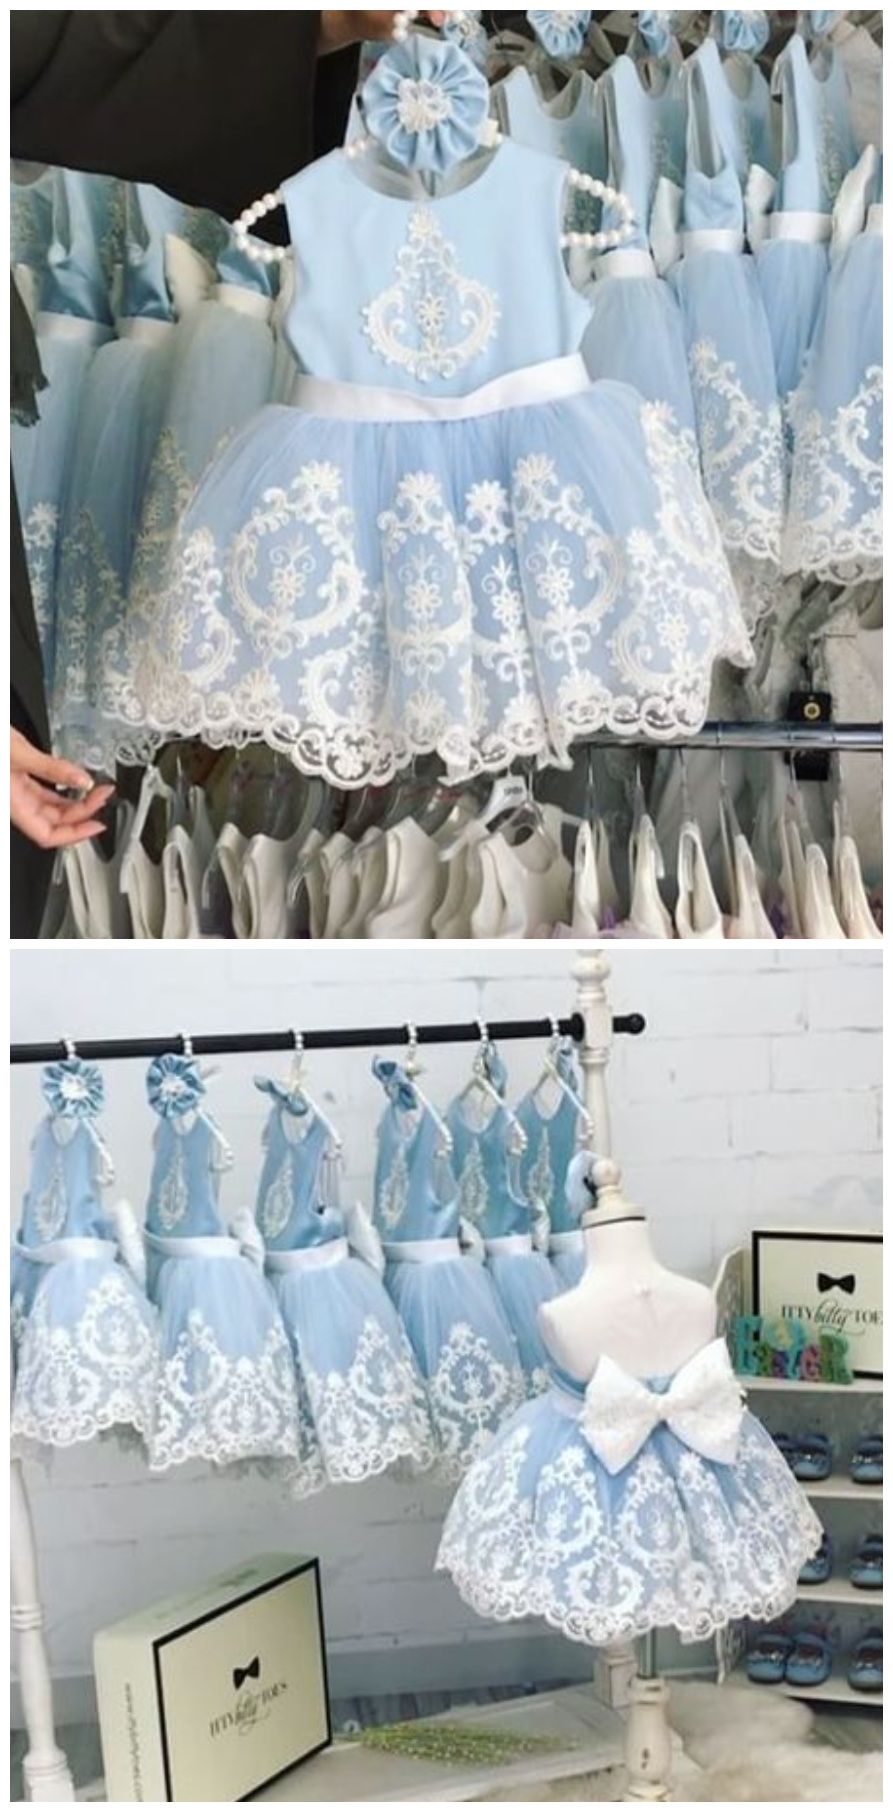 White Lace Appliques Sky Blue Long Flower Girl Dresses Ball Gown Girl Communion Dress Girls Pageant Dress Kids Prom Party Dress